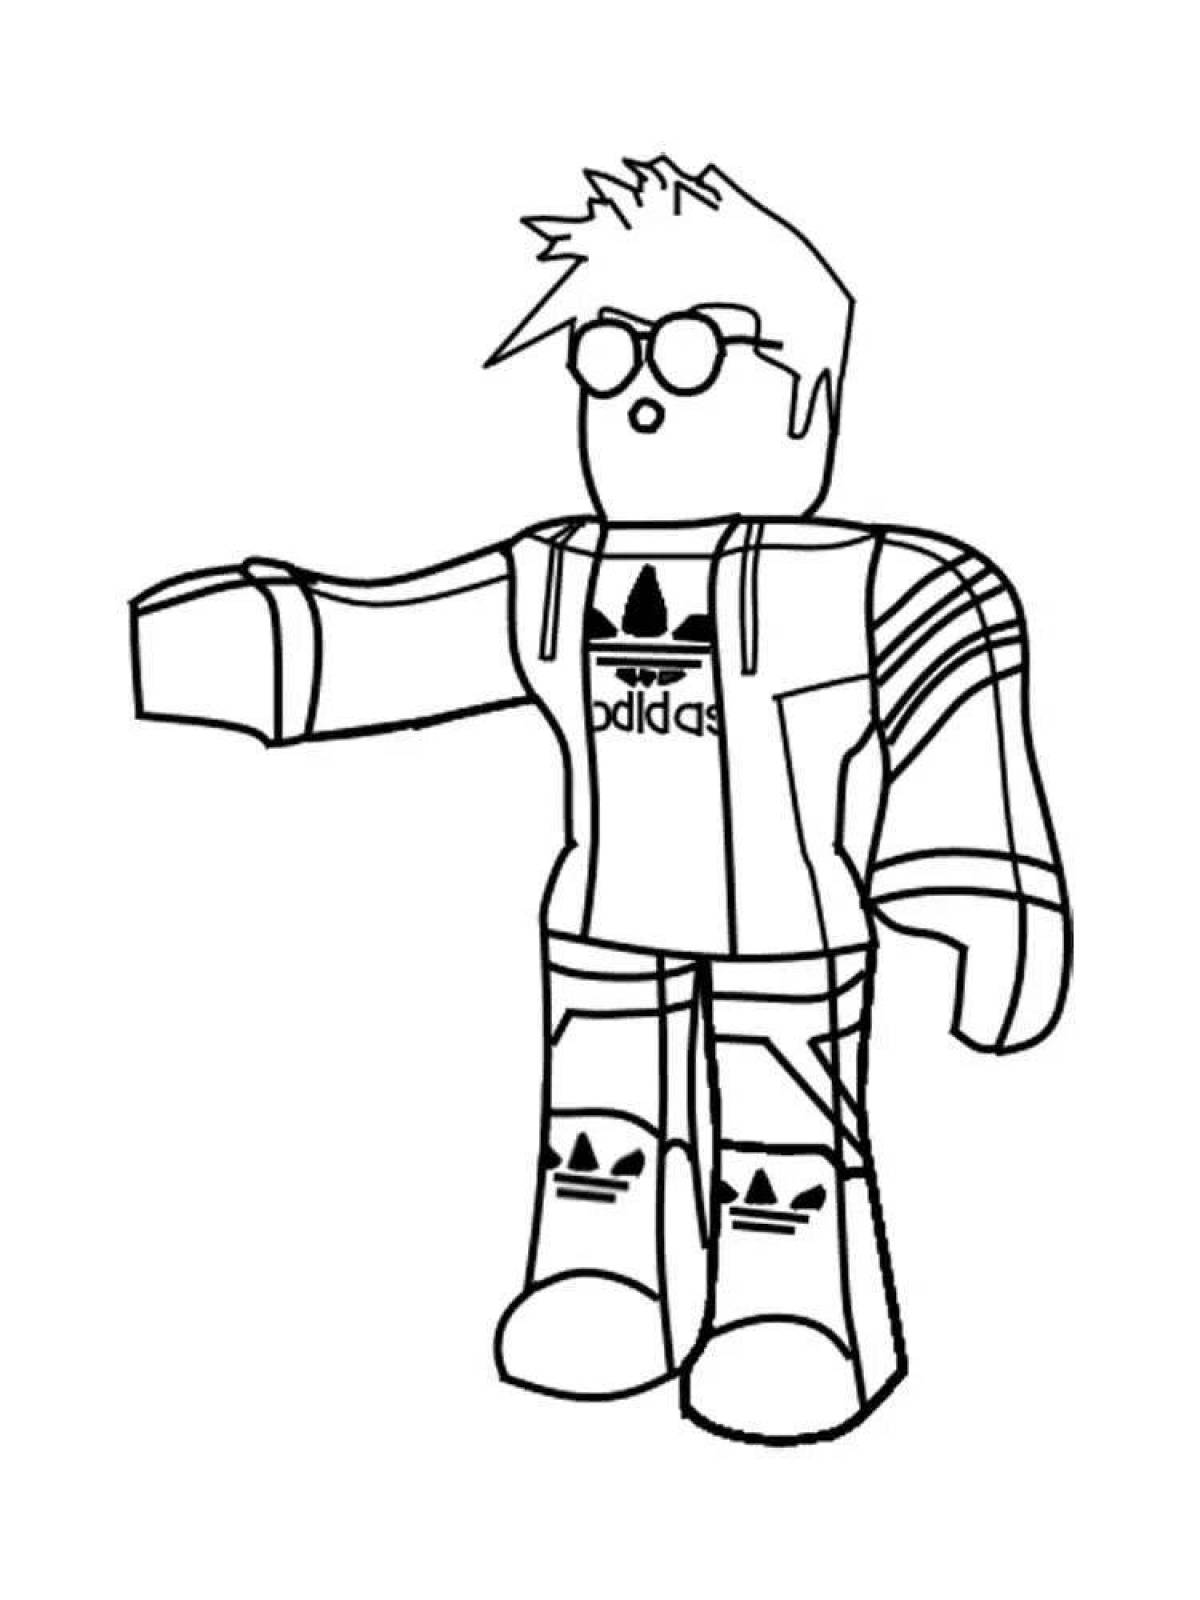 Roblox animated character coloring page